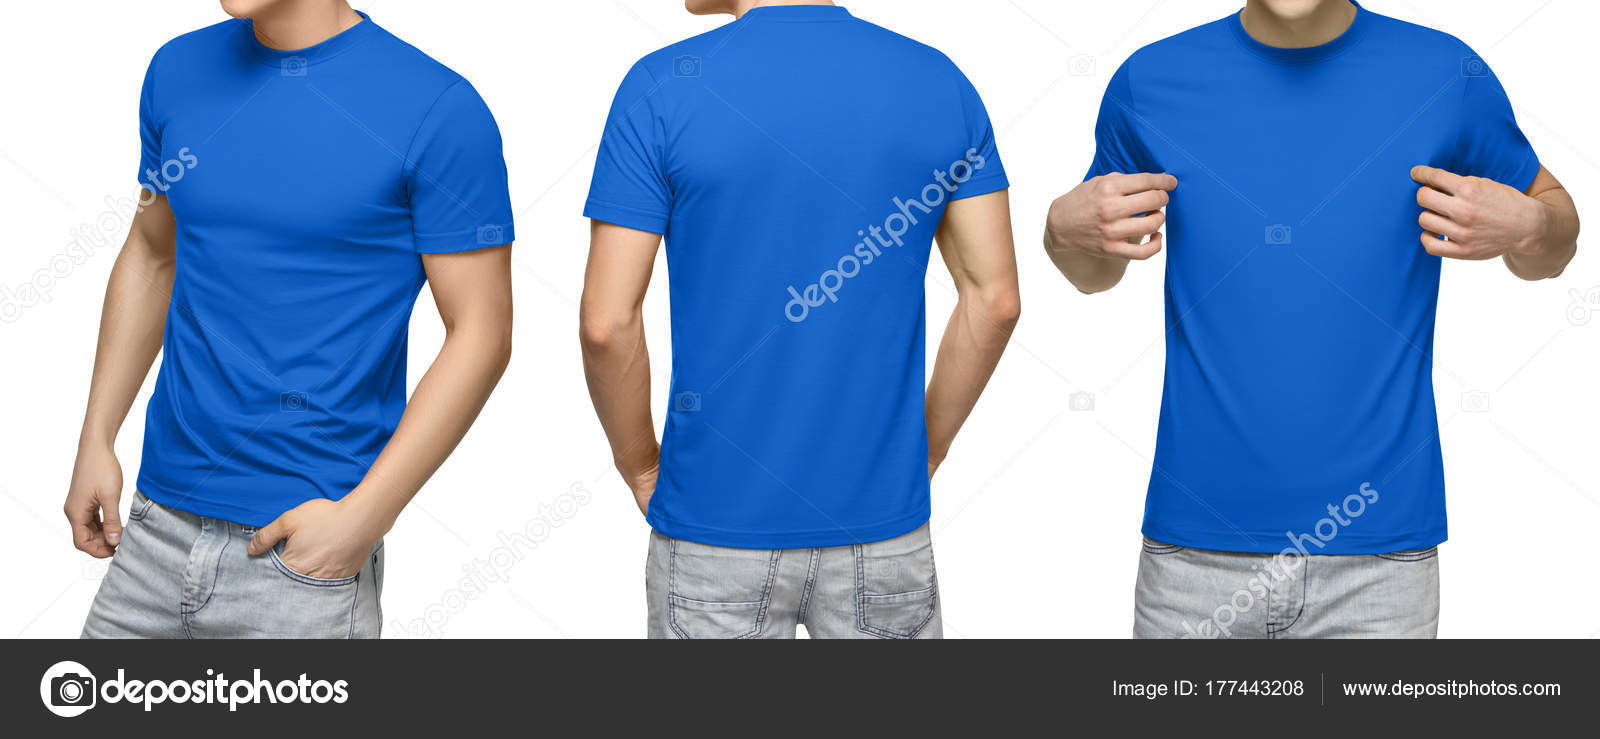 Download Young Male In Blank Blue T Shirt Front And Back View Isolated White Background With Clipping Path Design Men Tshirt Template And Mockup For Print Stock Photo Image By C Ra33 177443208